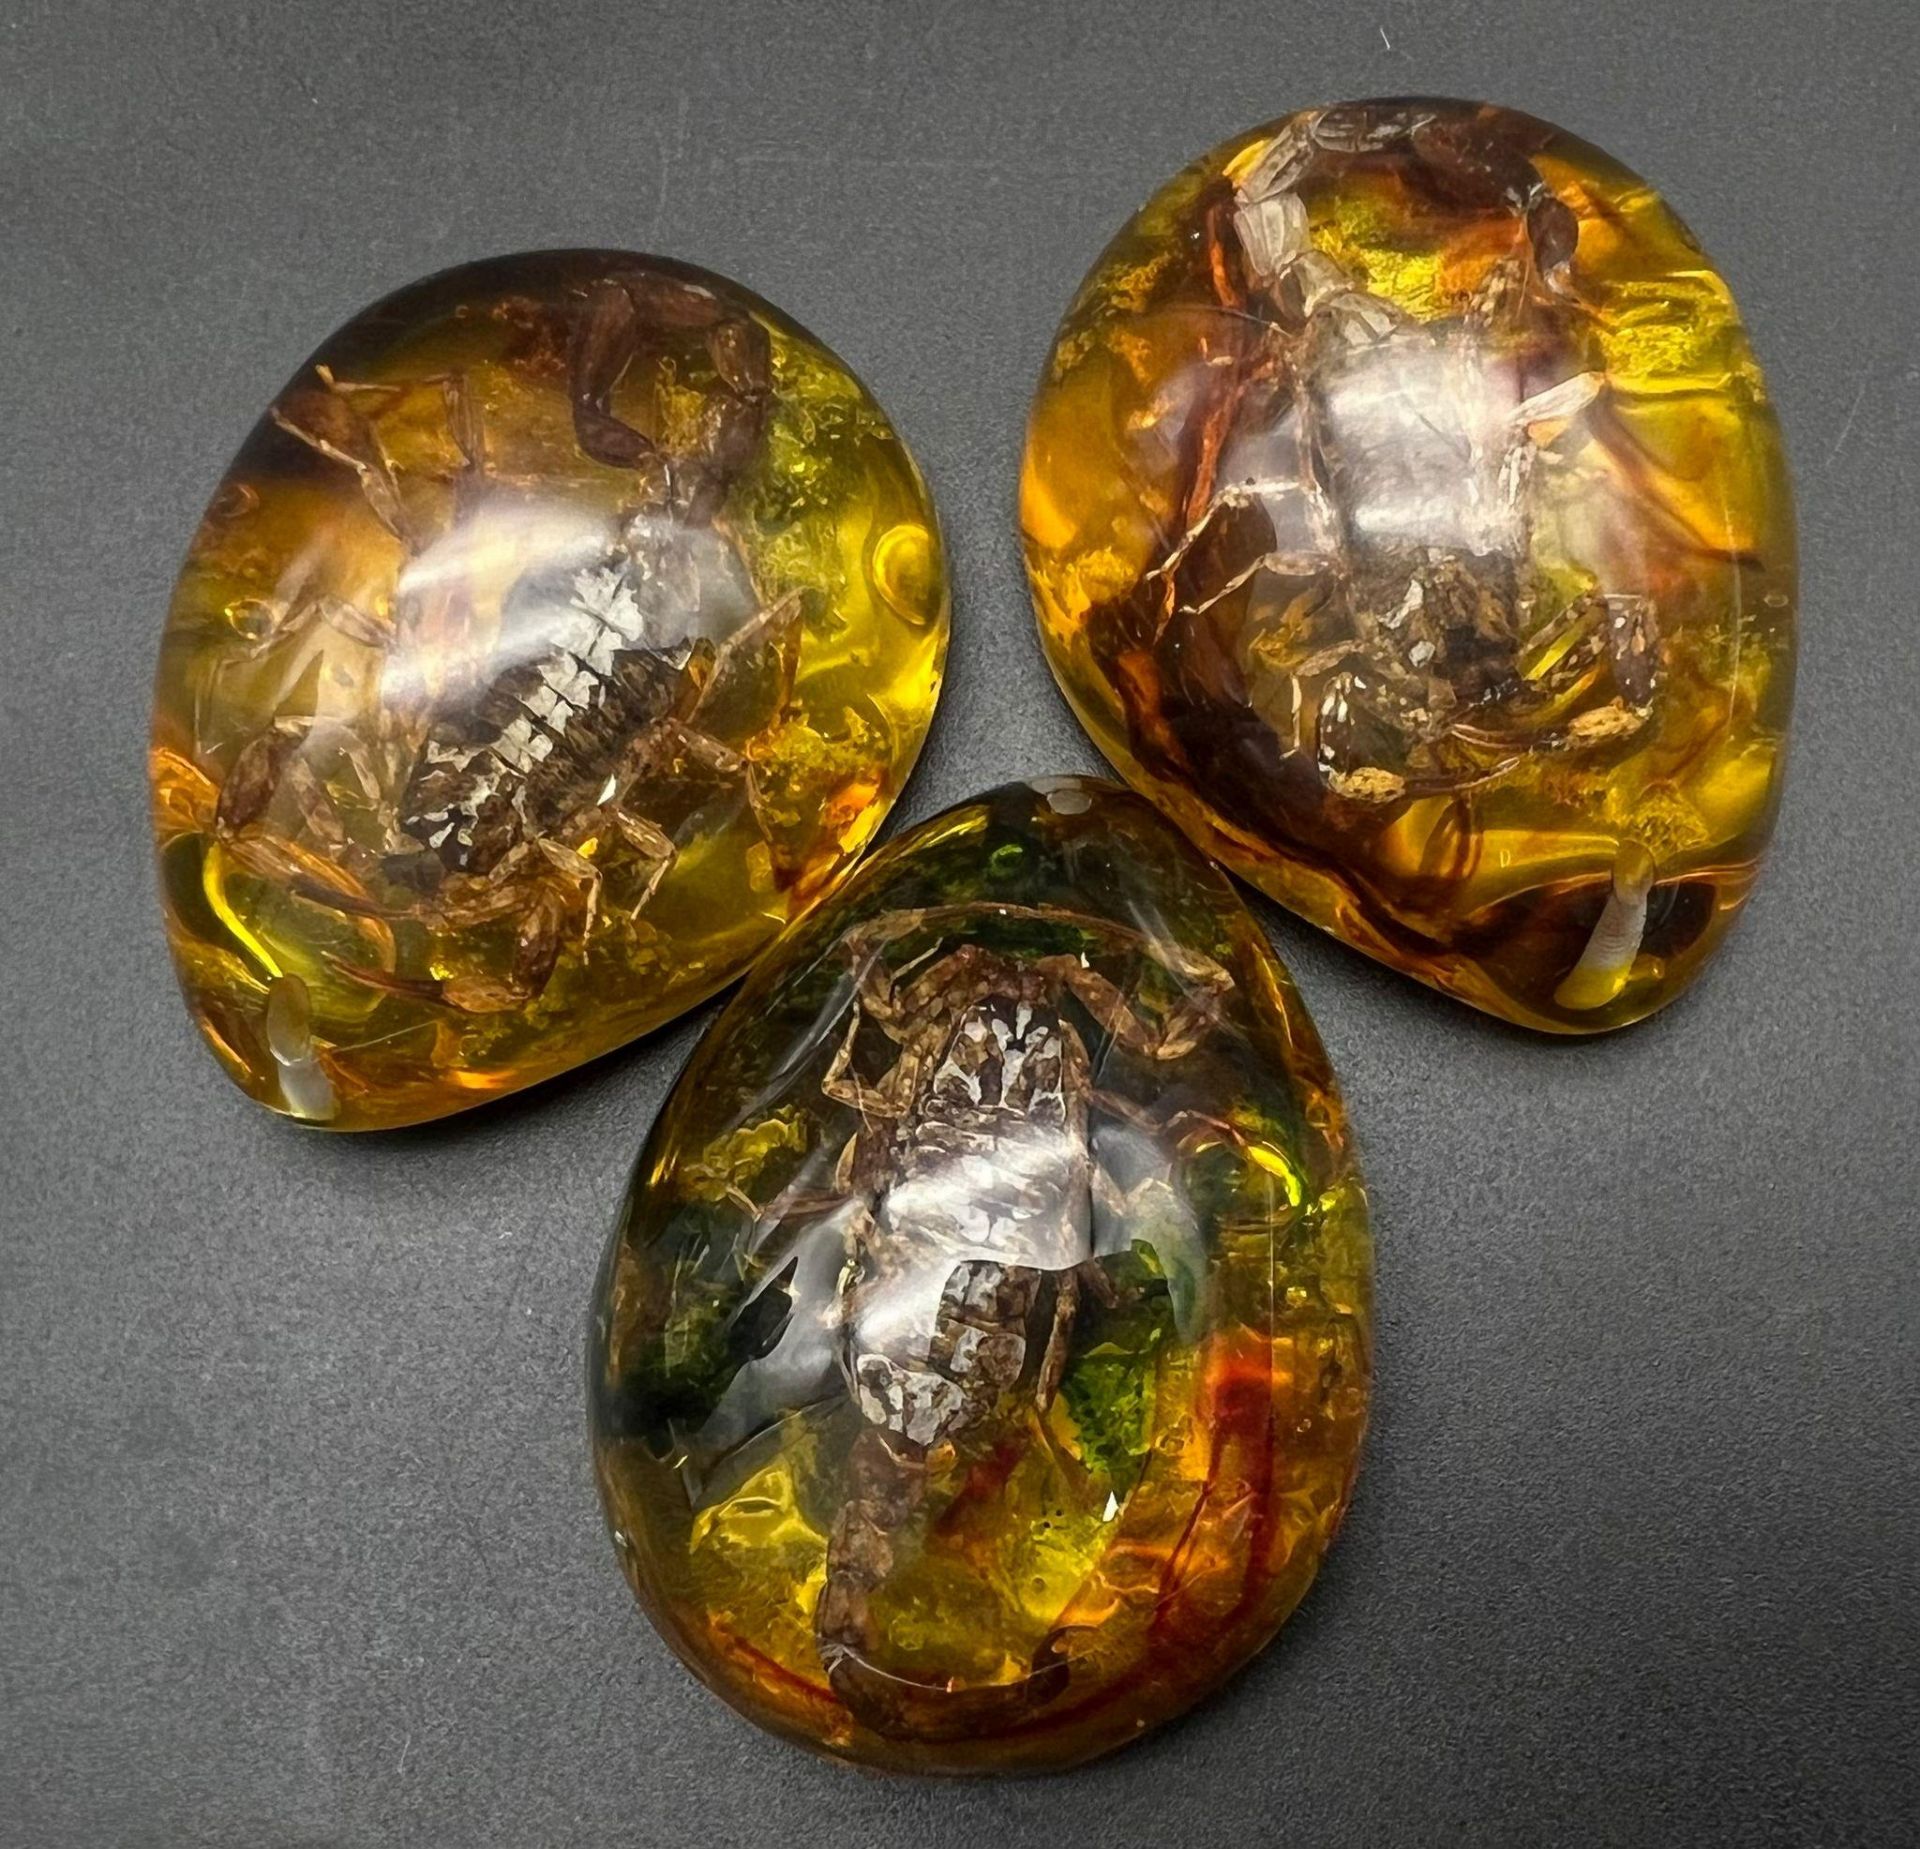 Not one but three scorpions preserved in amber resin! May be used as pendants or paperweights or